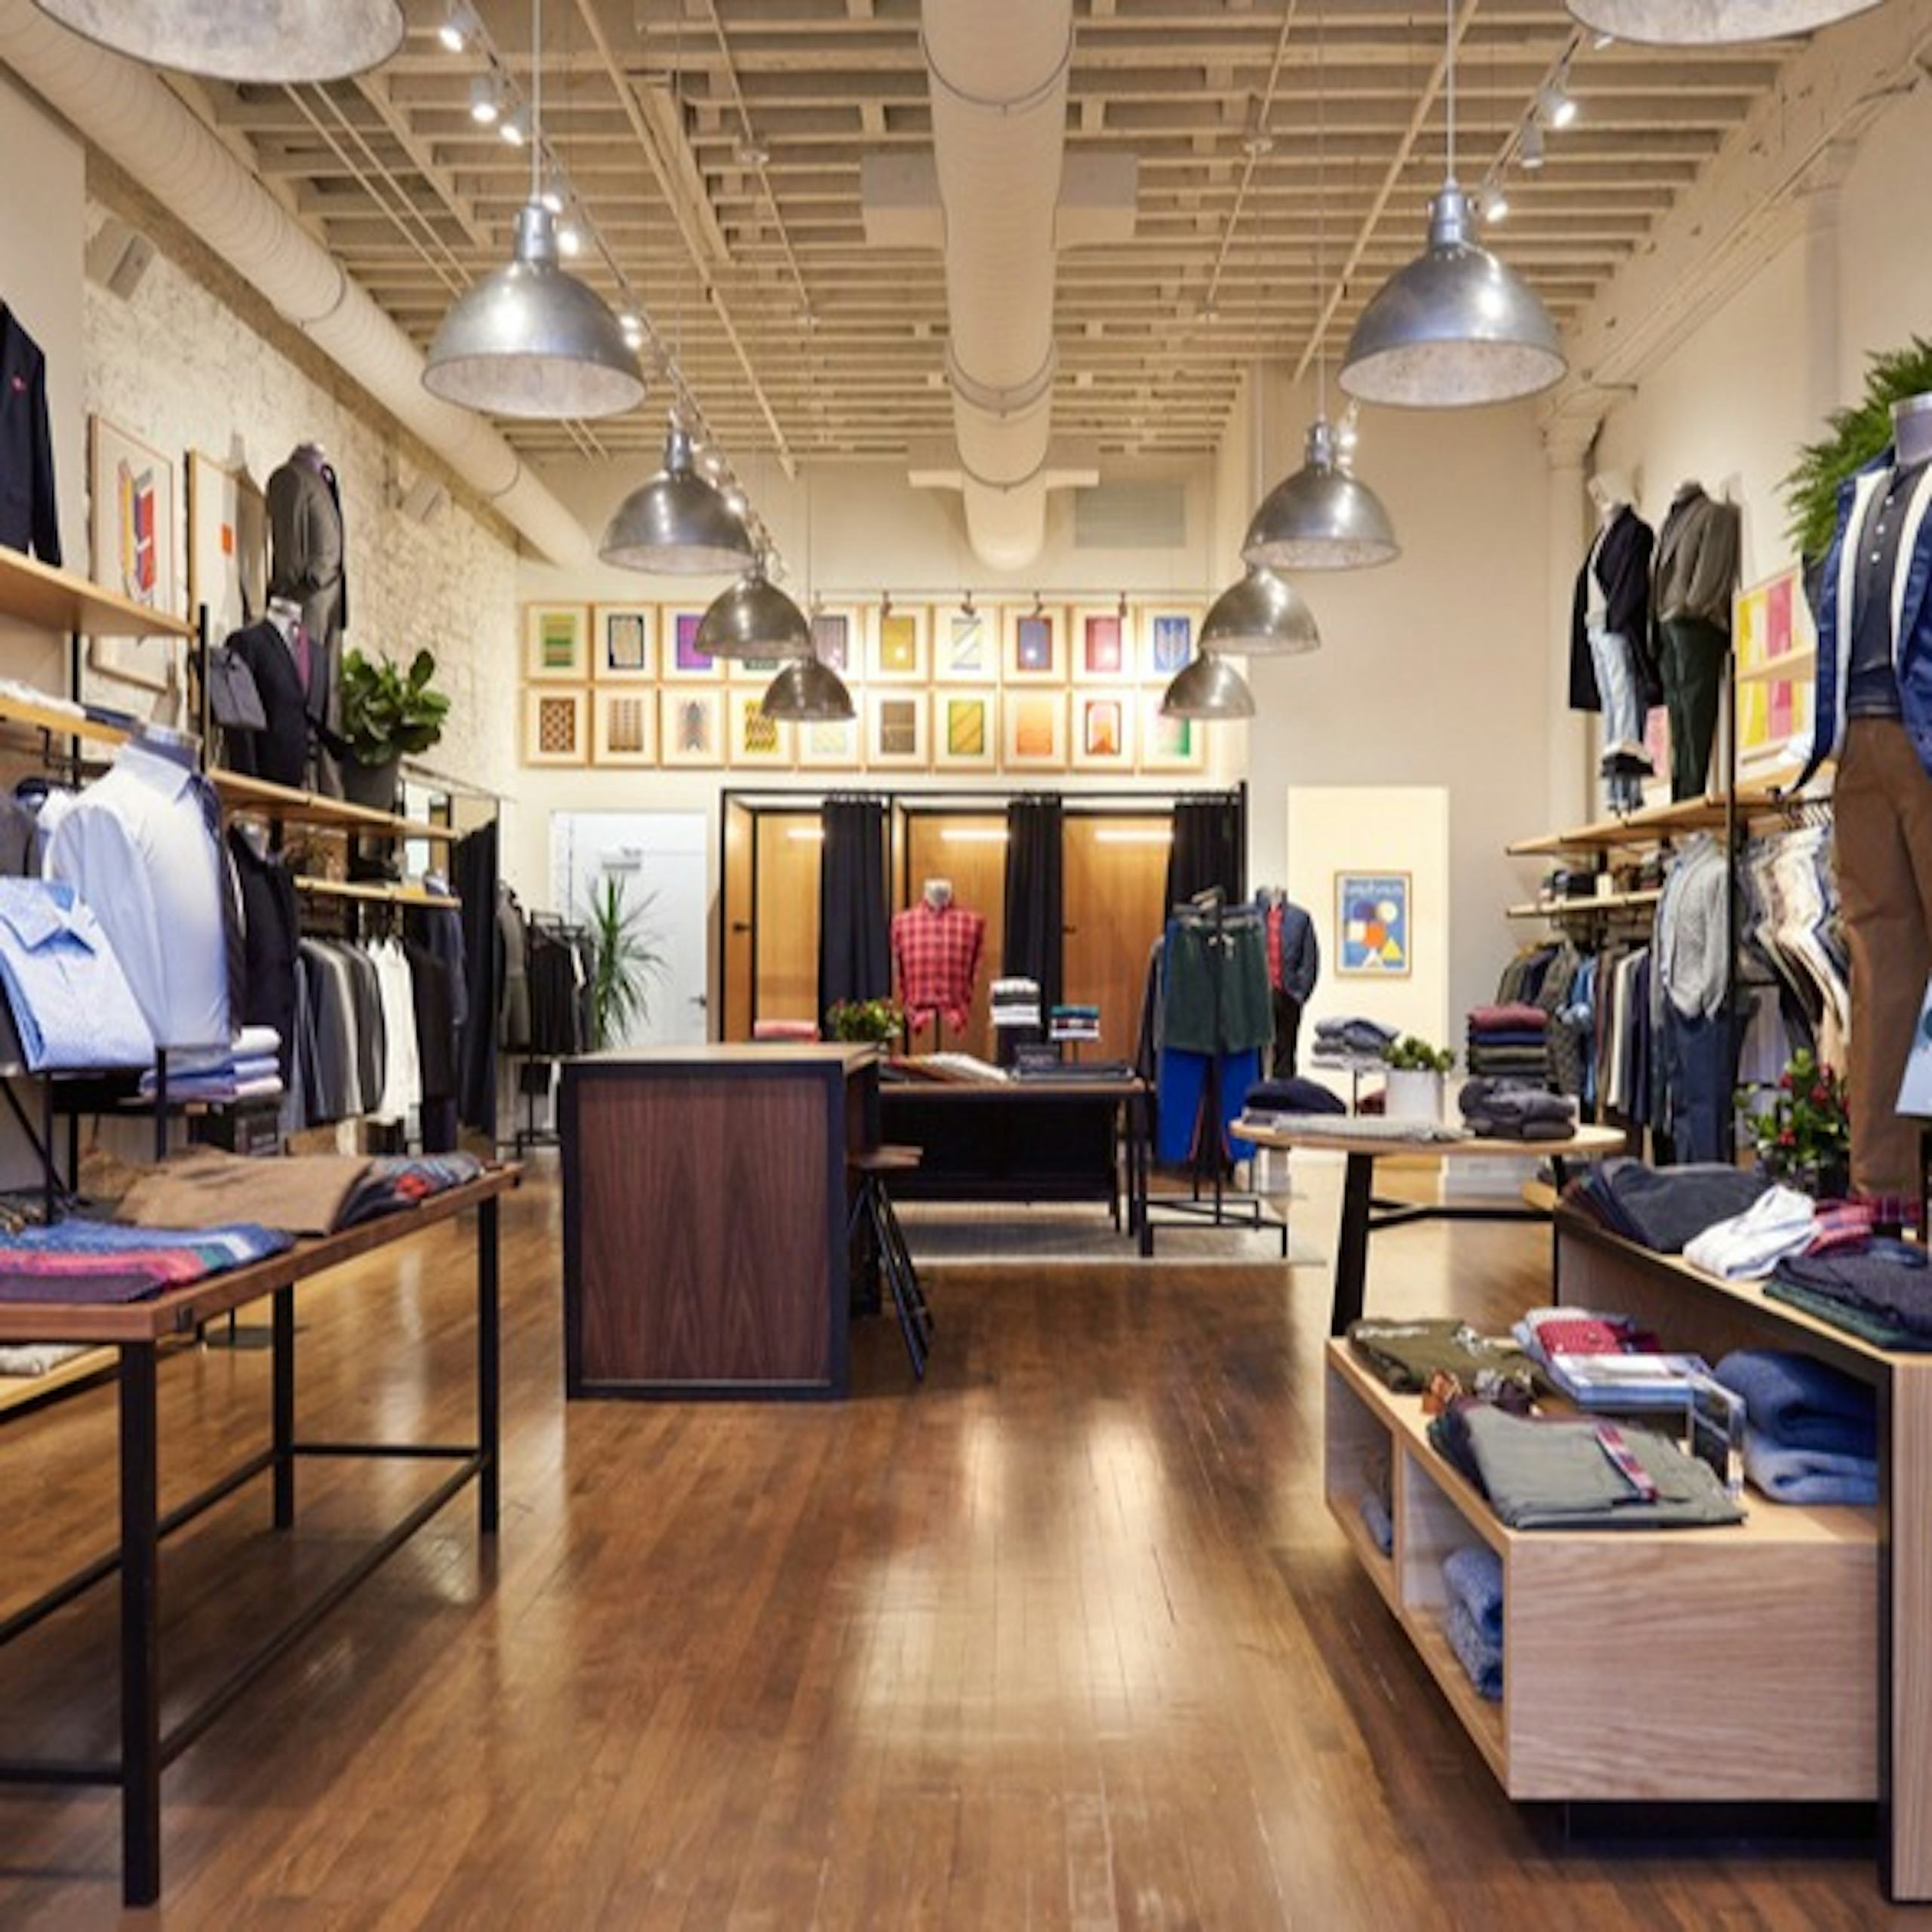 Image of Bonobos in North Loop, Minneapolis. Store Display shows menswear including business casual shirts, casual shirts, dress pants and outerwear. 